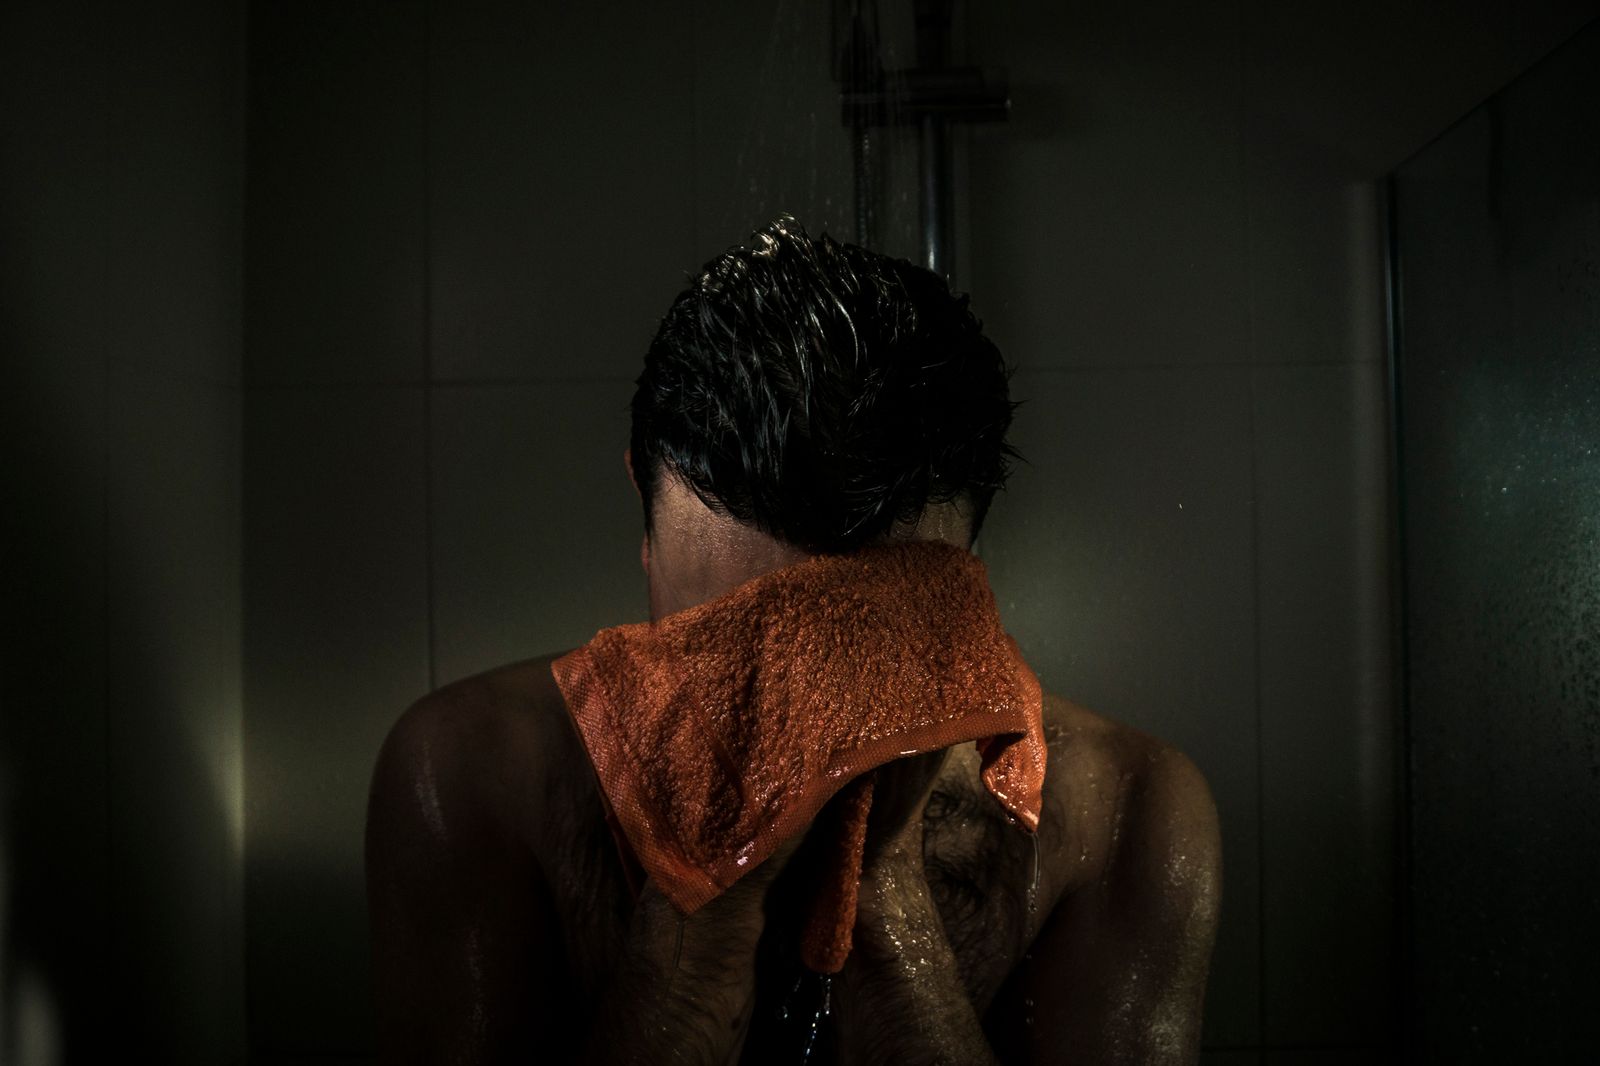 © Annette Ruzicka - The shower has become a place for both conversation. It gives me a chance to talk to my husband during night shift.